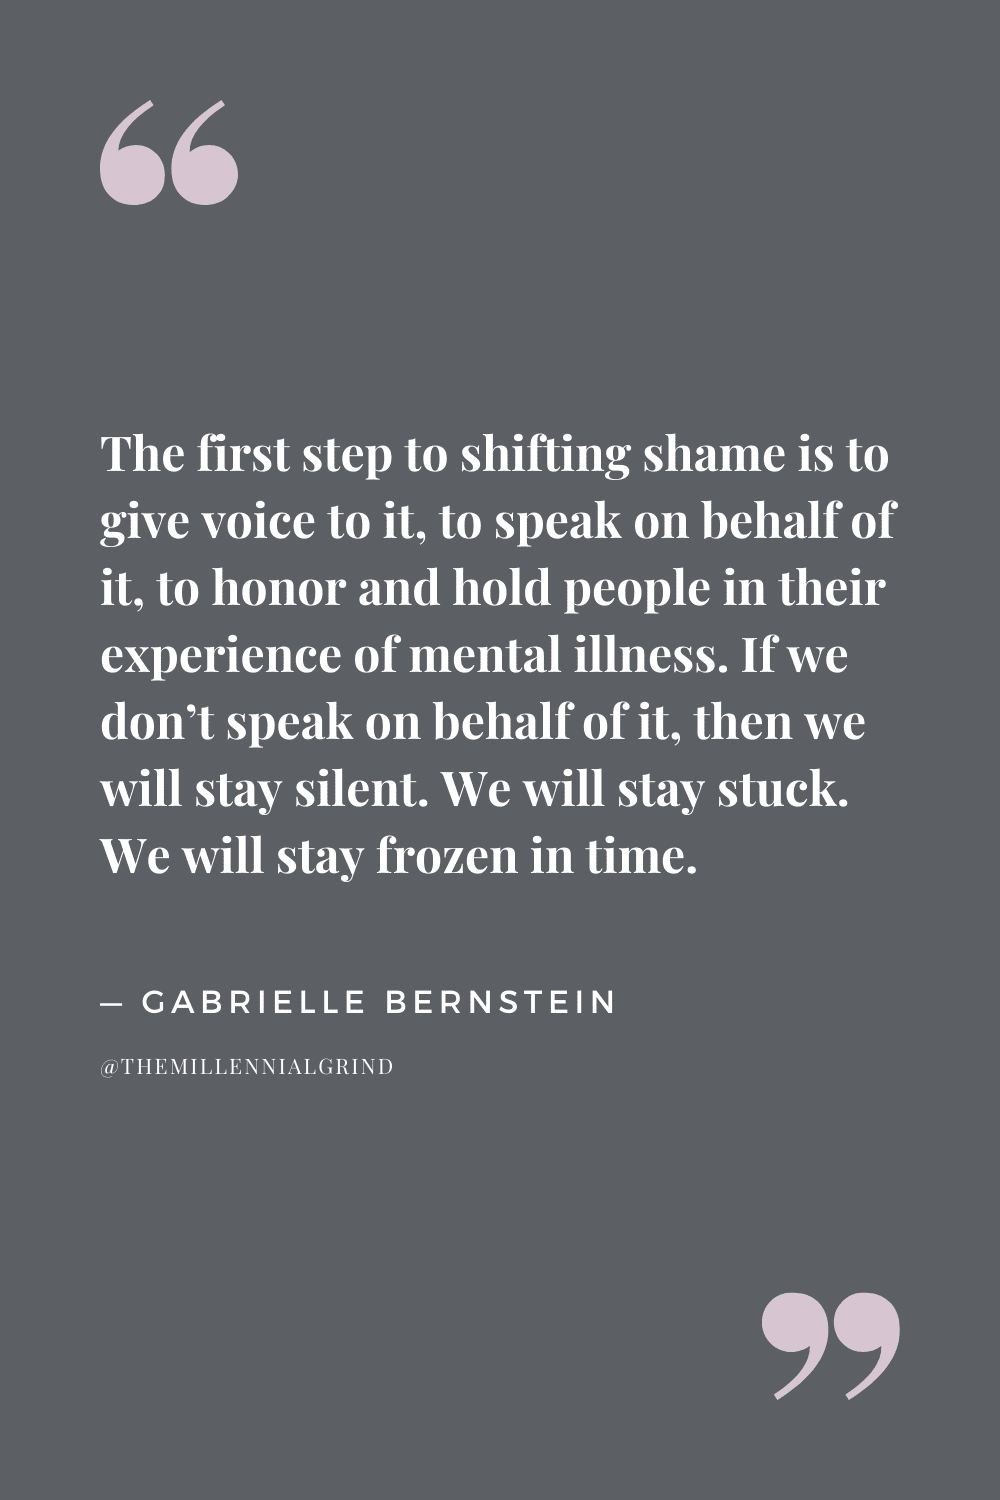 Quotes from Happy Days by Gabrielle Bernstein